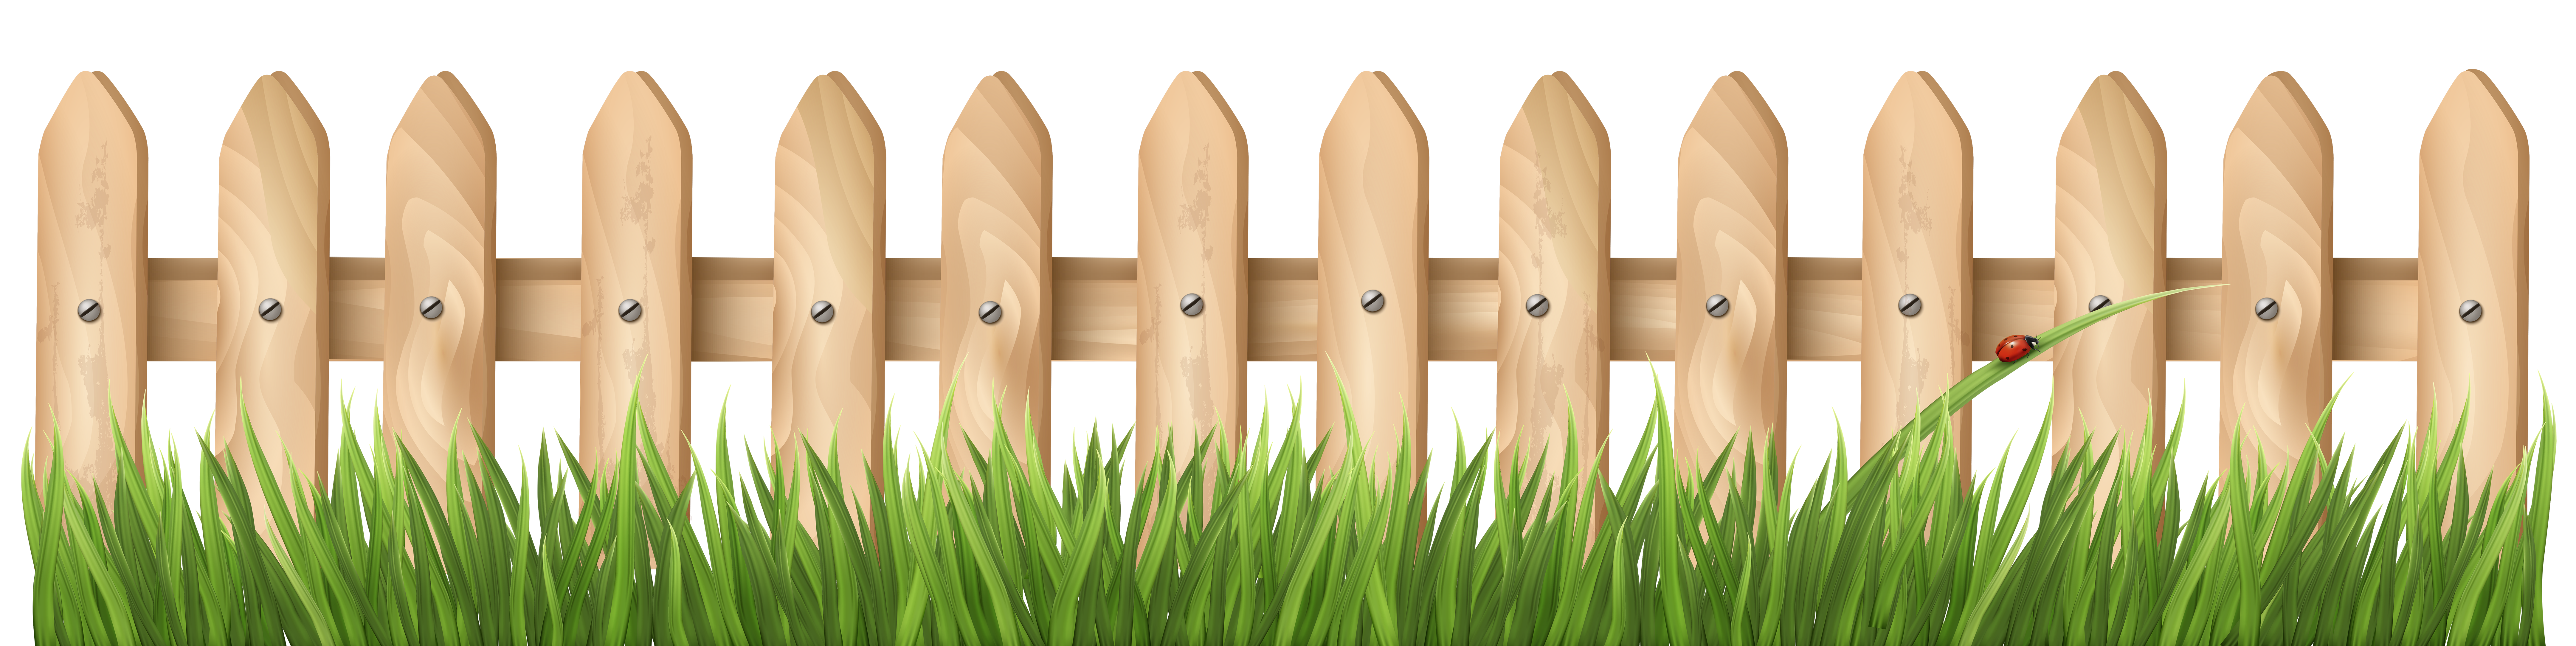 Fence clipart #4, Download drawings